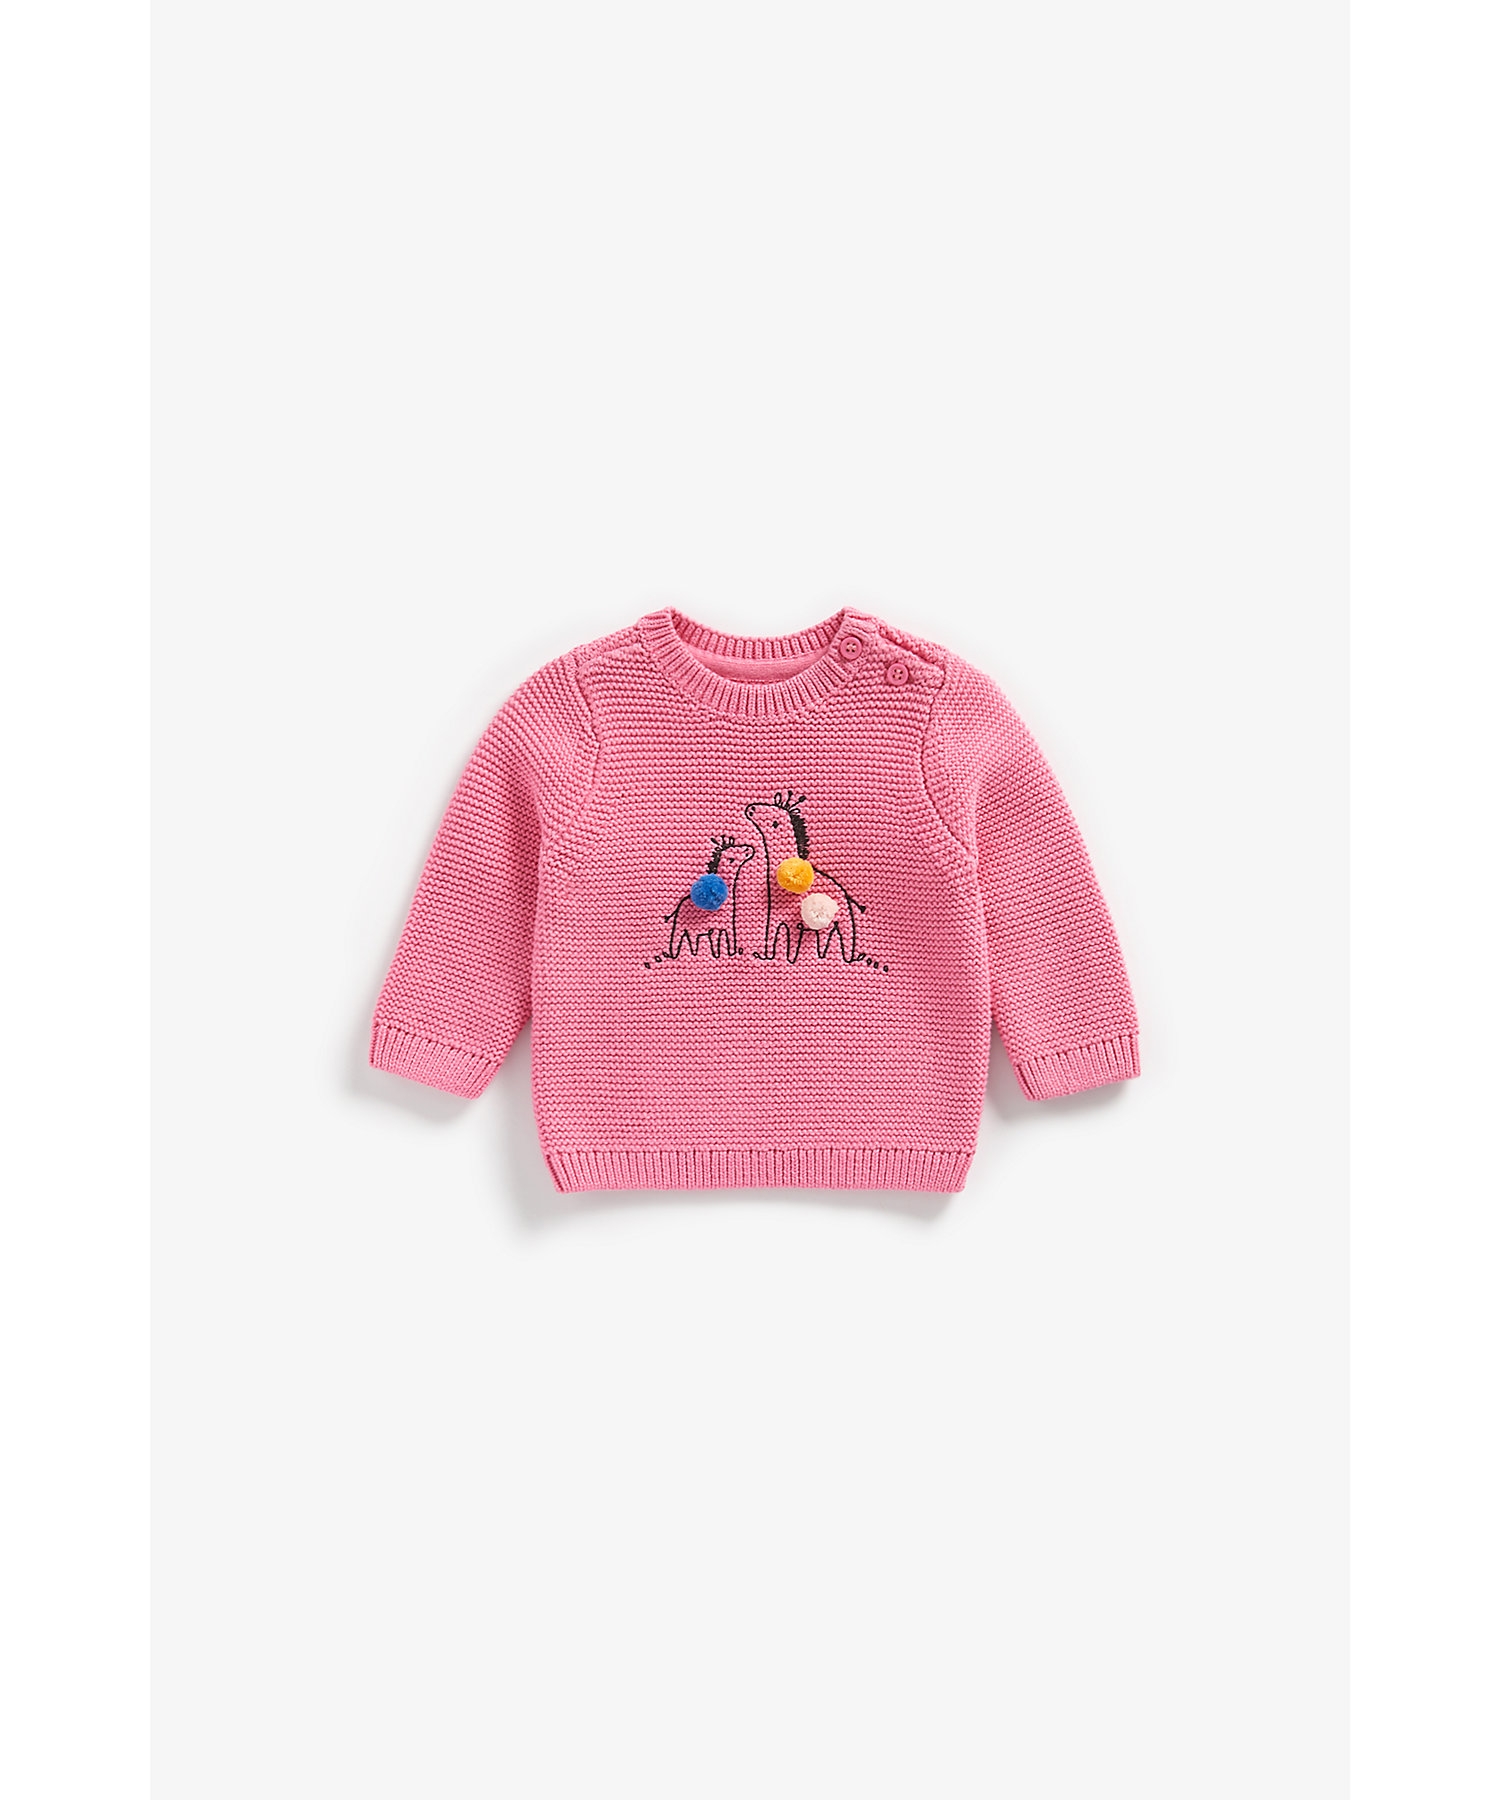 Mothercare | Girls Full Sleeves Sweater Zebra Embroidery And Pom Pom Details - Pink